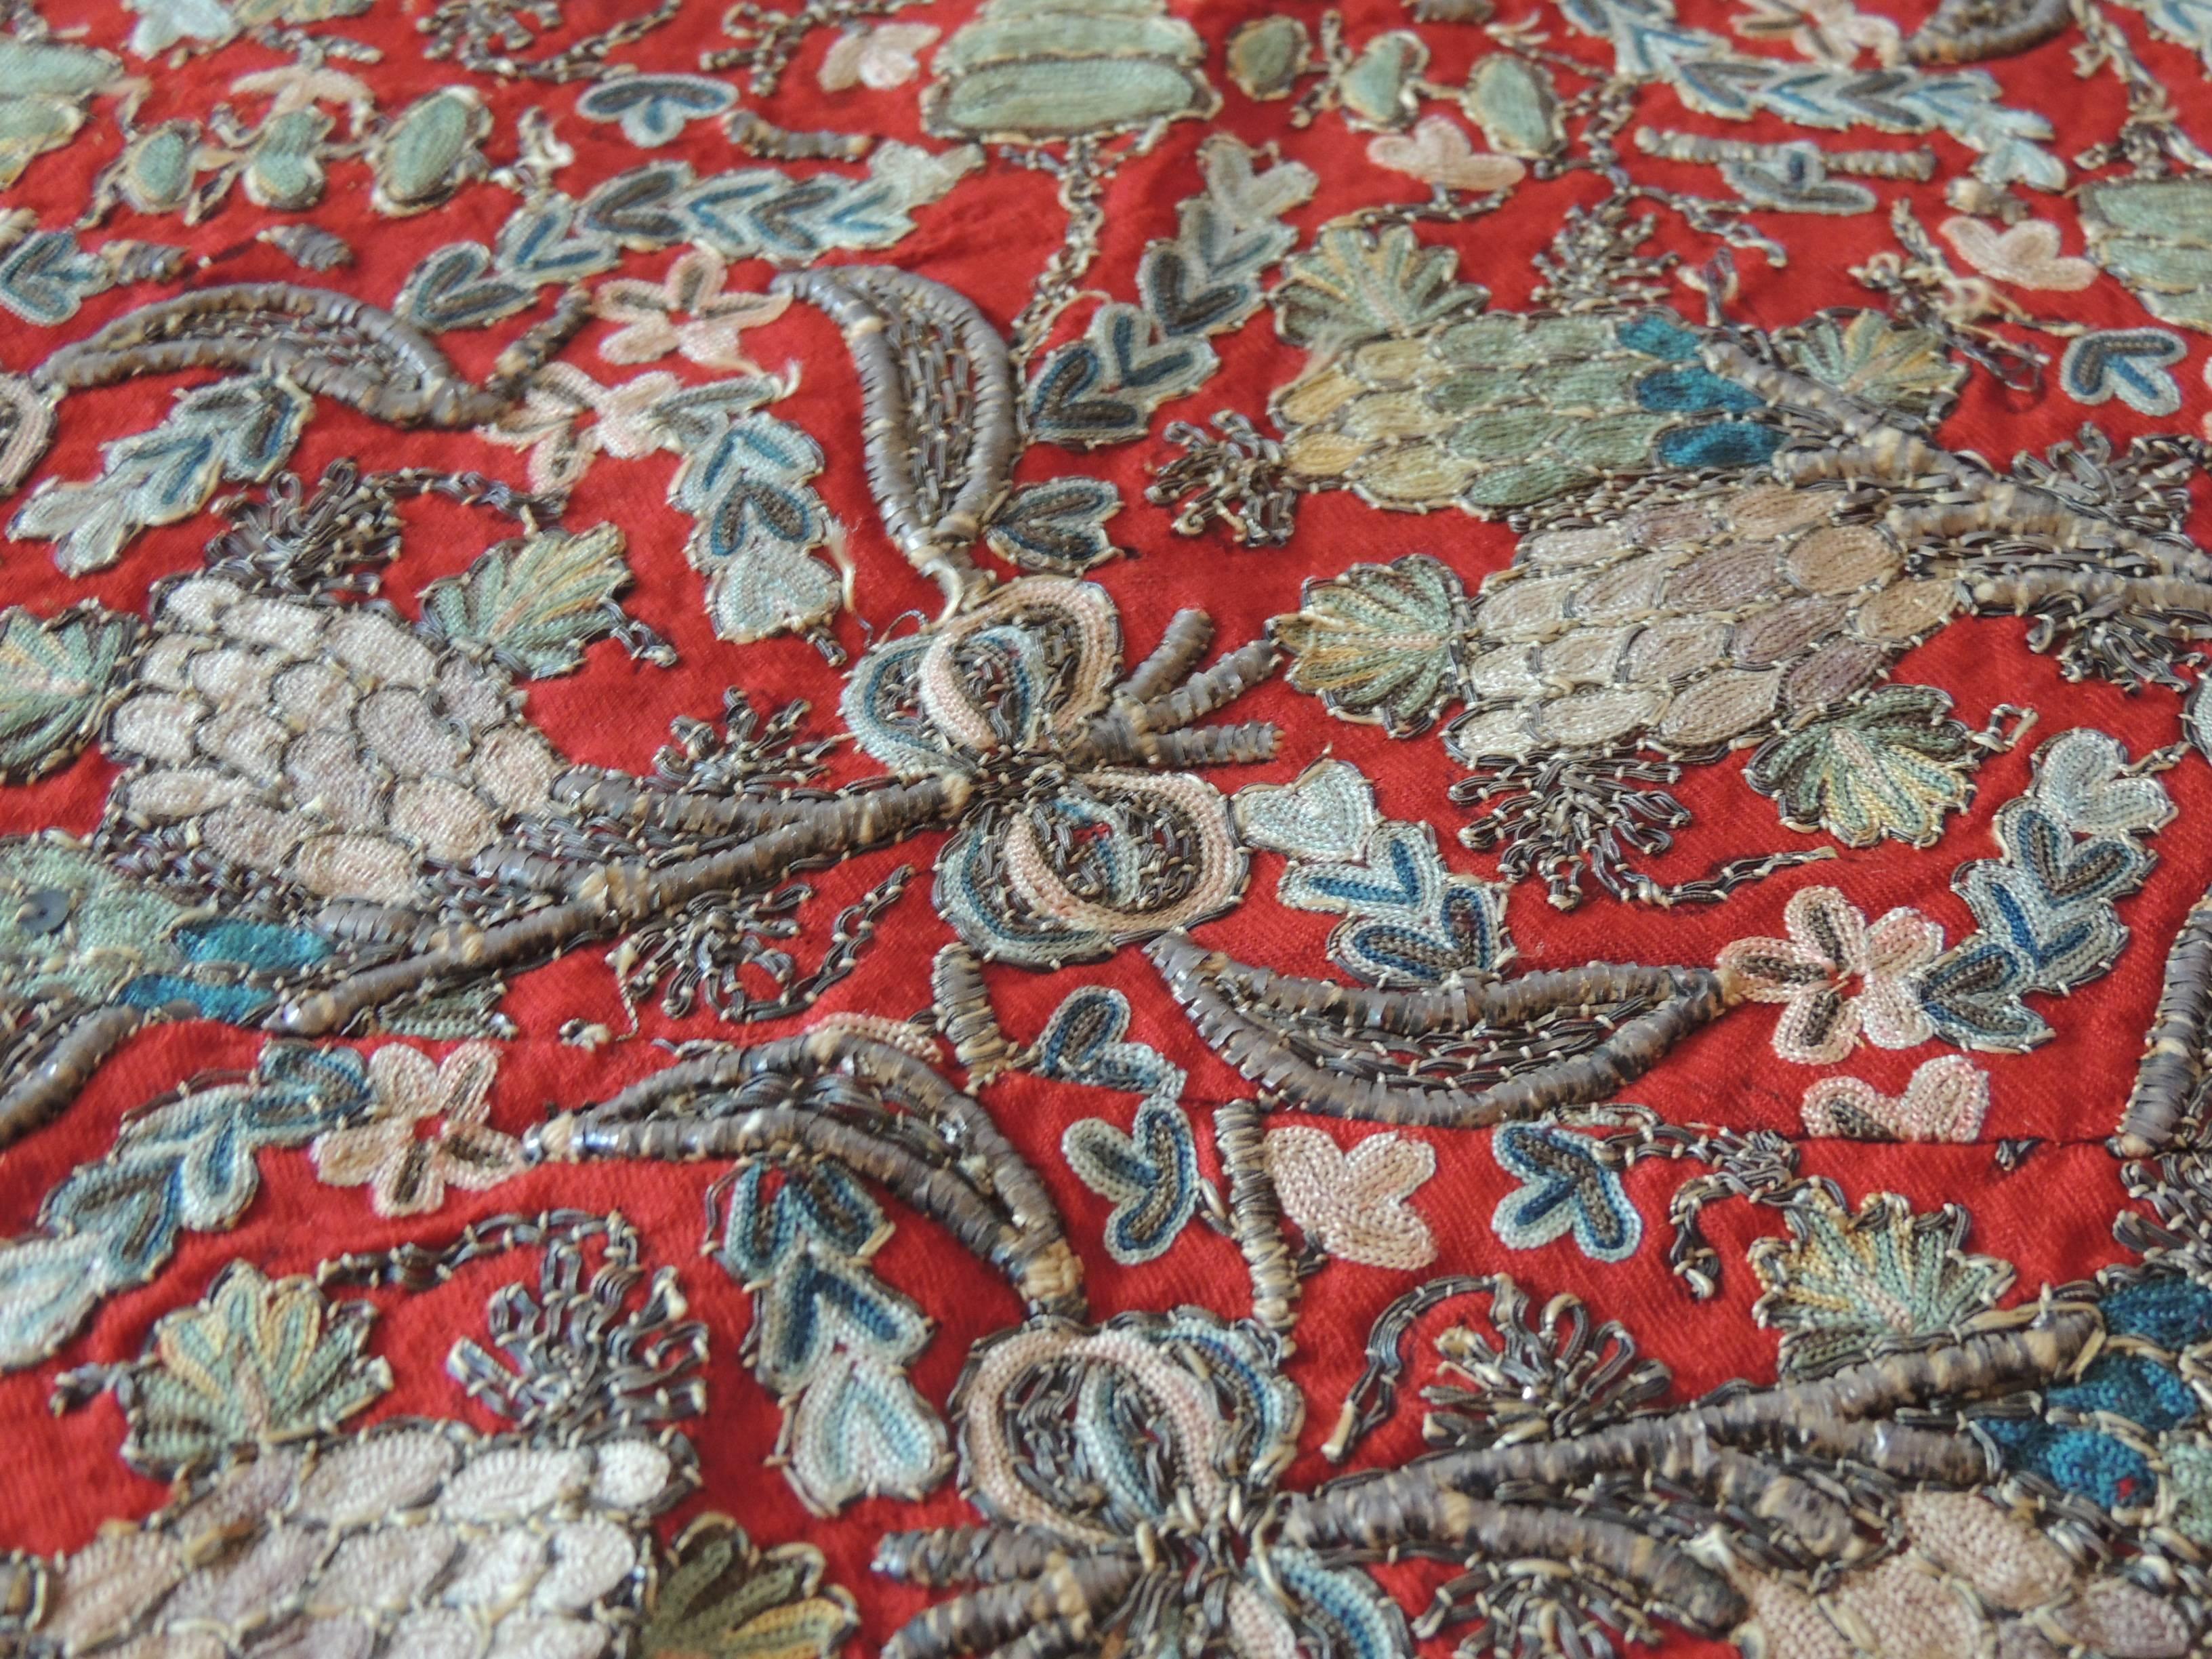 Moorish Antique Red Persian Embroidery Textile Panel with Metallic Threads